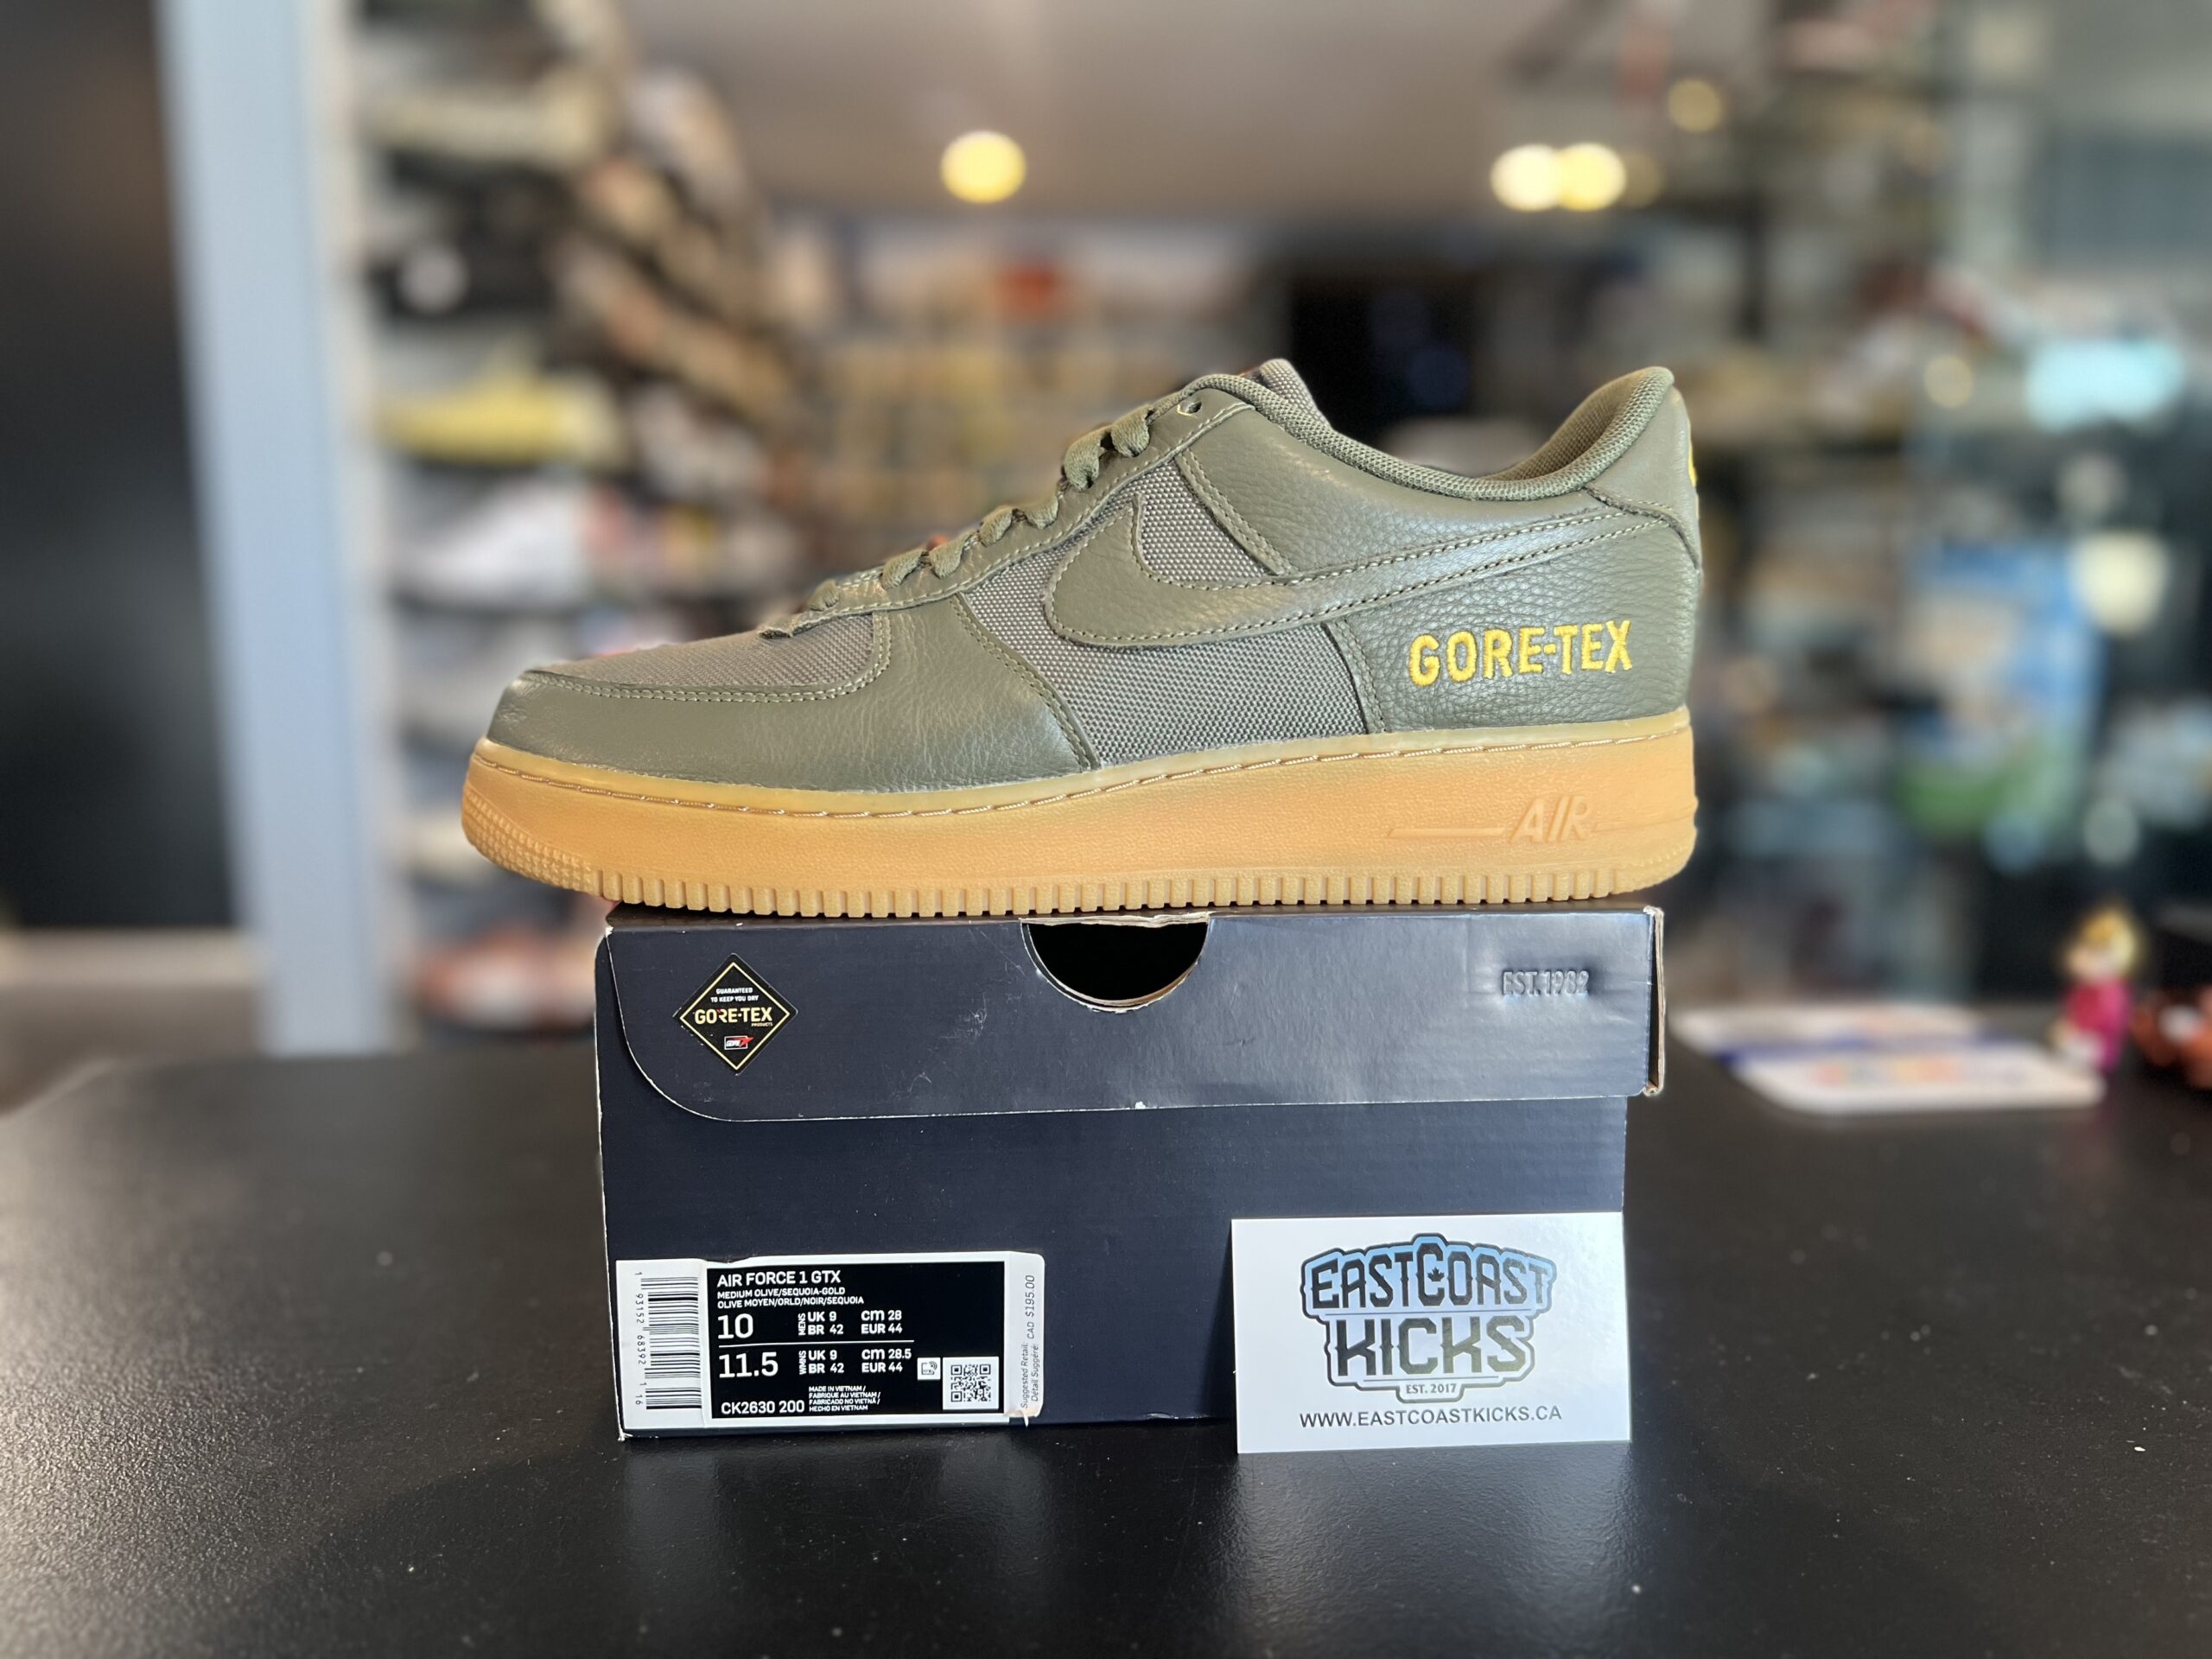 Preowned Nike Air Force 1 Low Gore-Tex Medium Olive Size 10